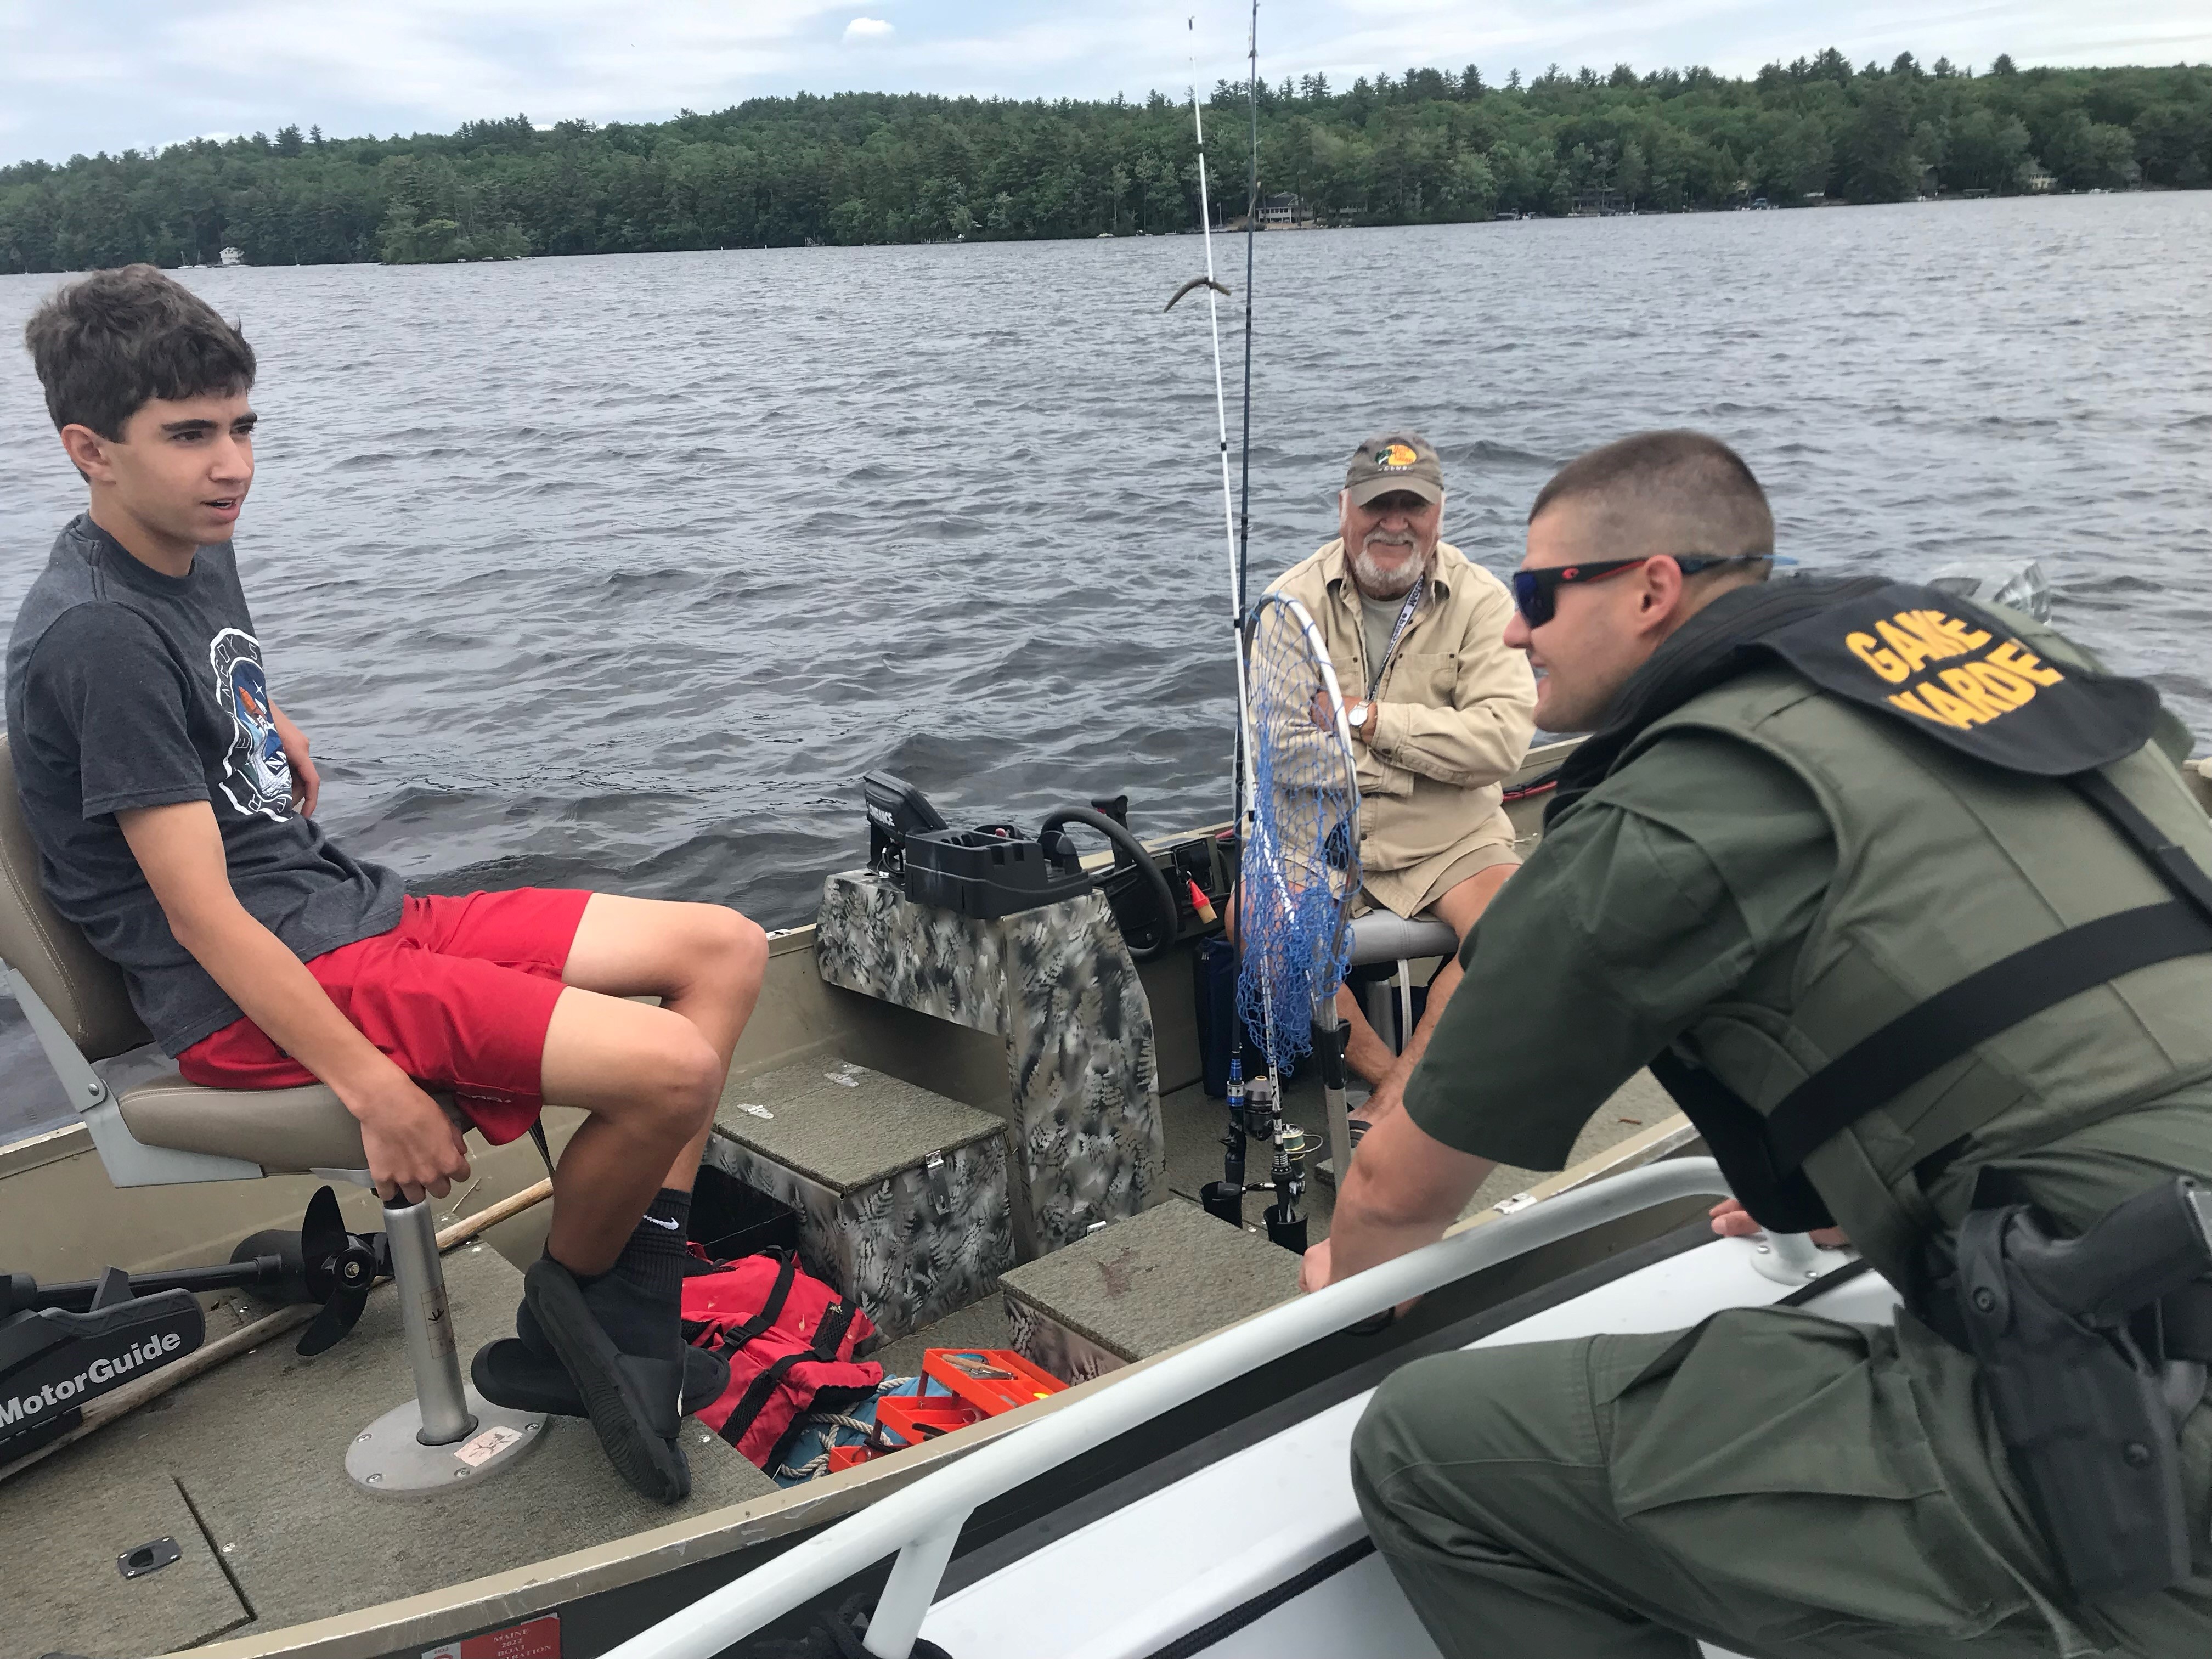 Deputy Game Warden York contacting boaters